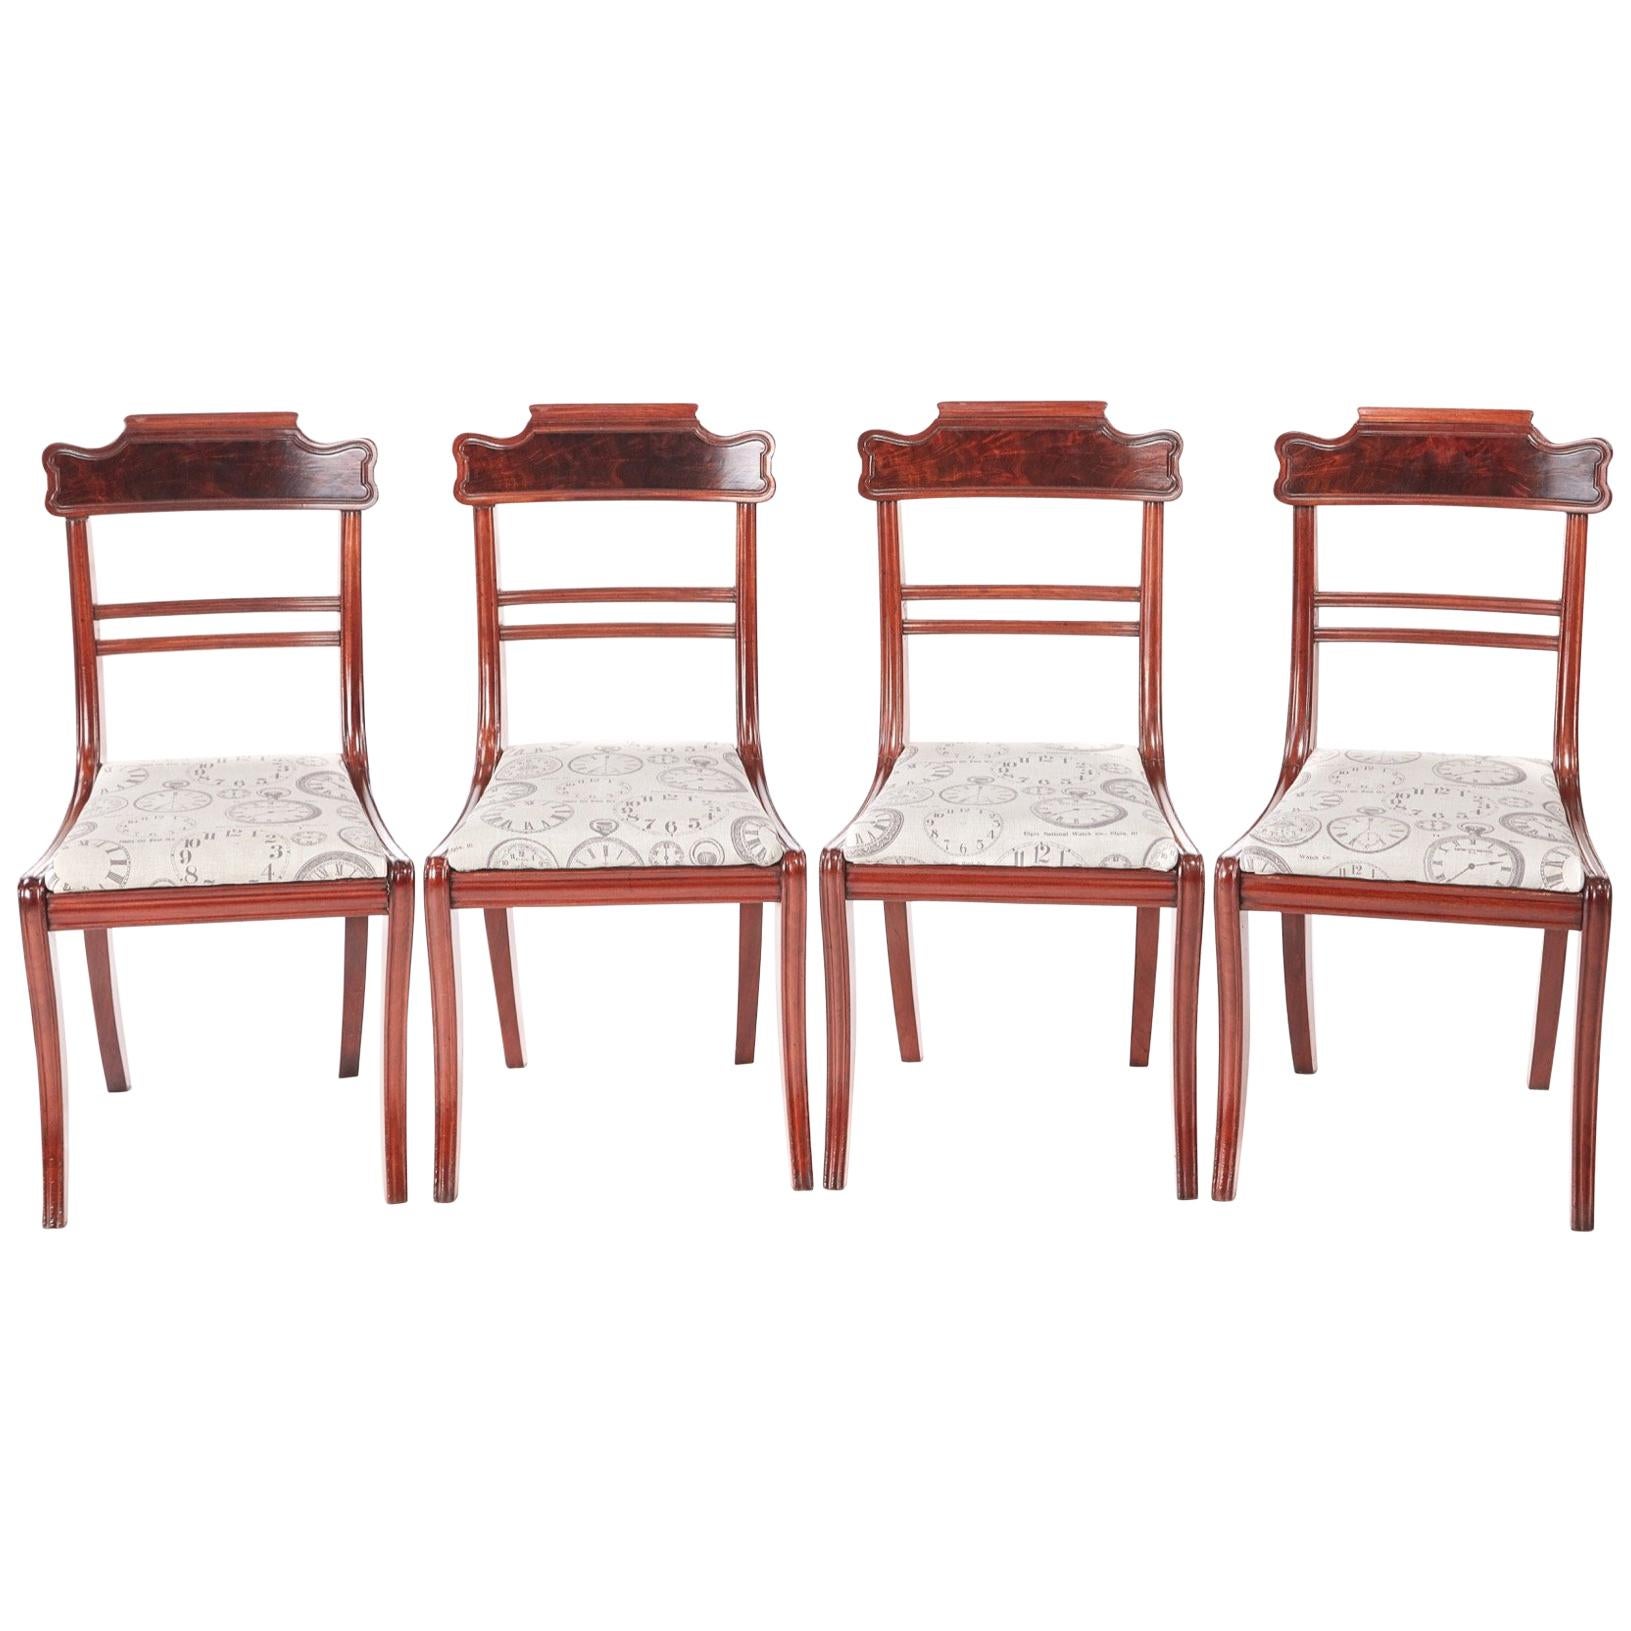 Quality Set of Four Regency Mahogany Dining Chairs For Sale